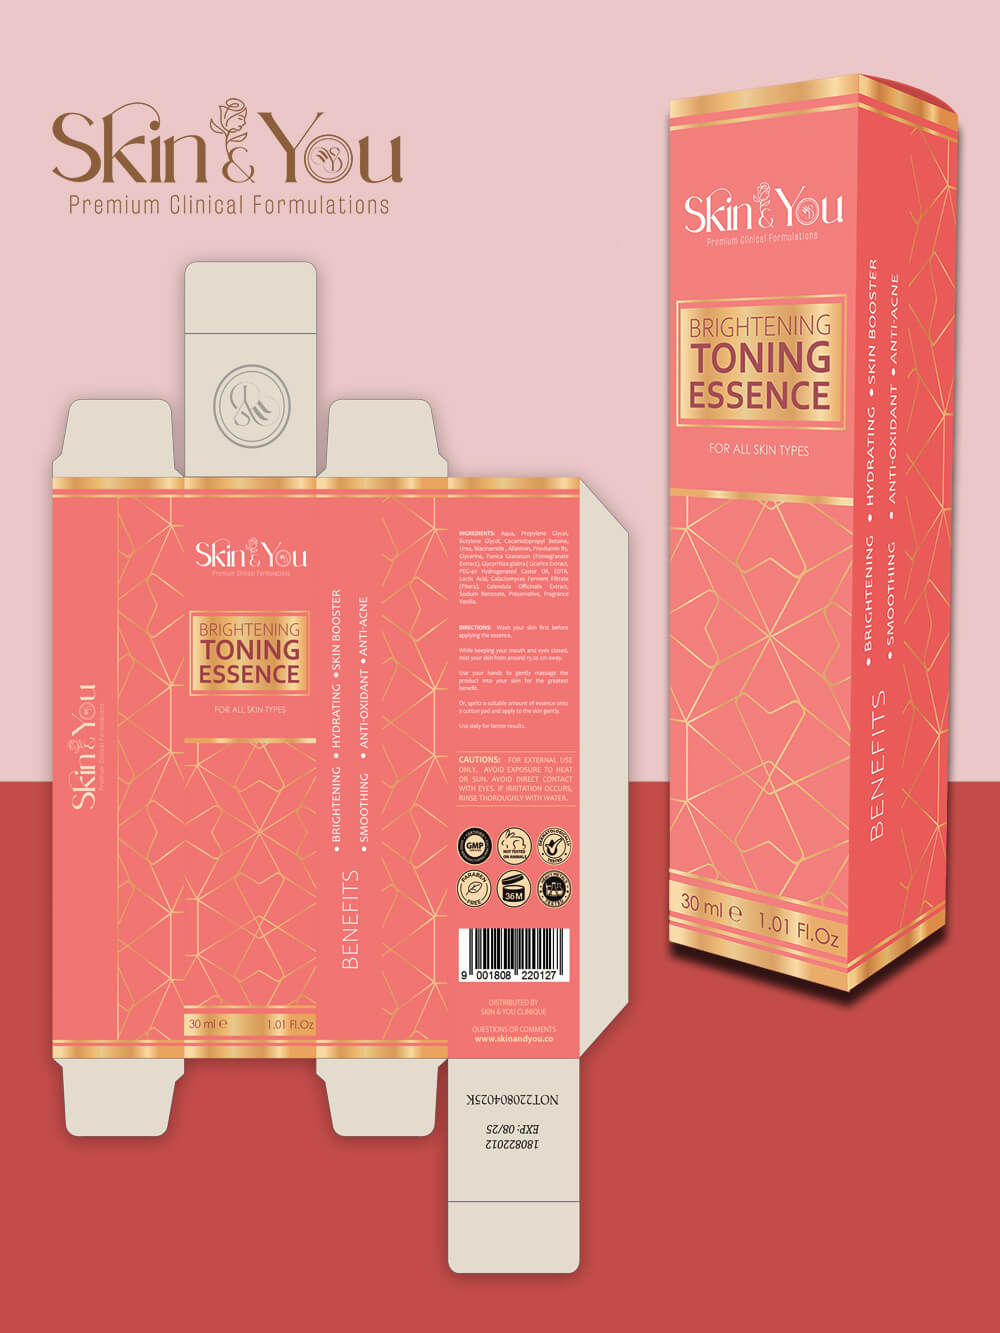 product packaging design price